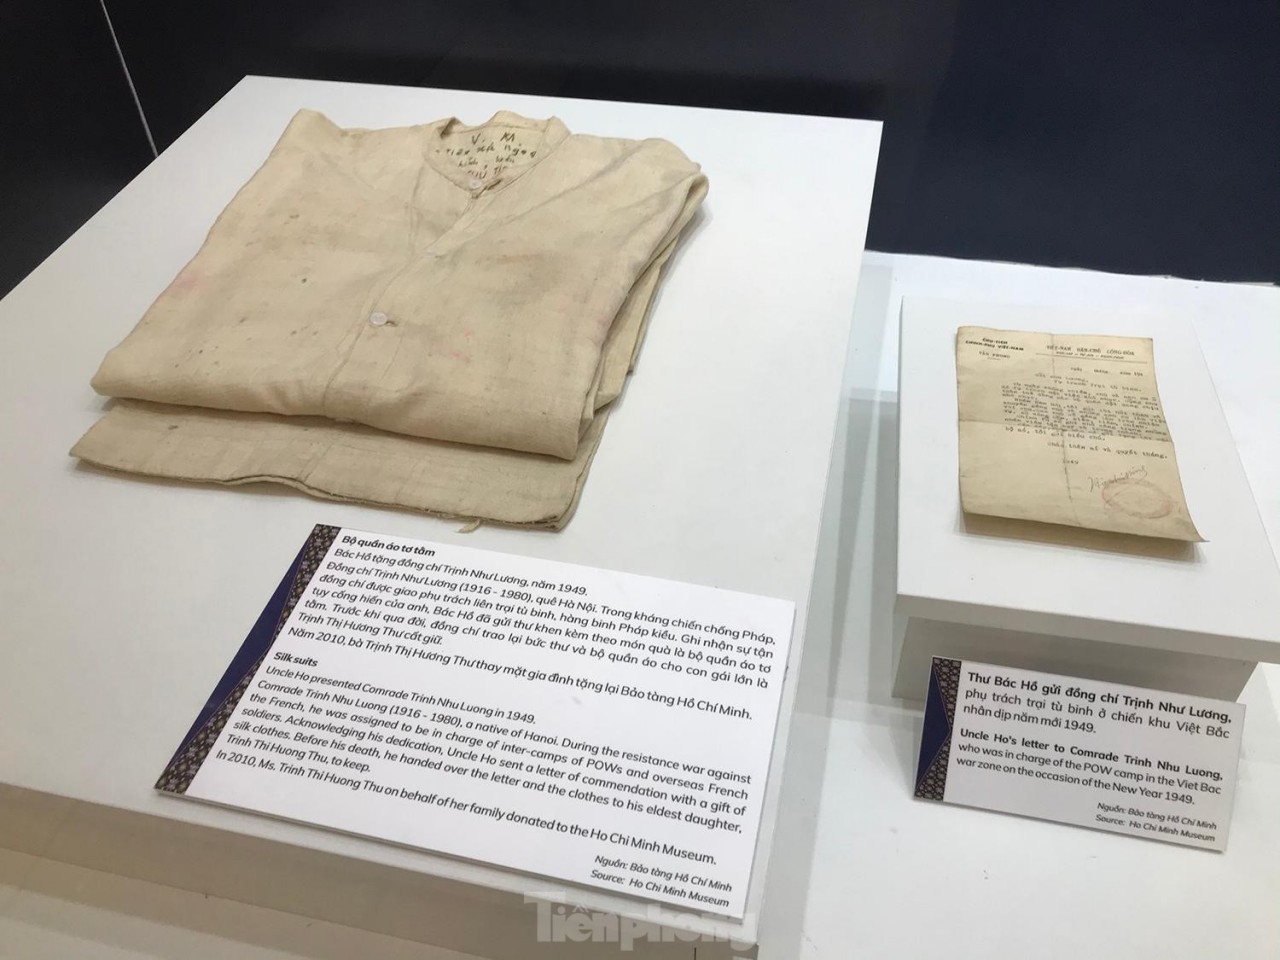 Rare Memorabilia Tell Stories about President Ho Chi Minh